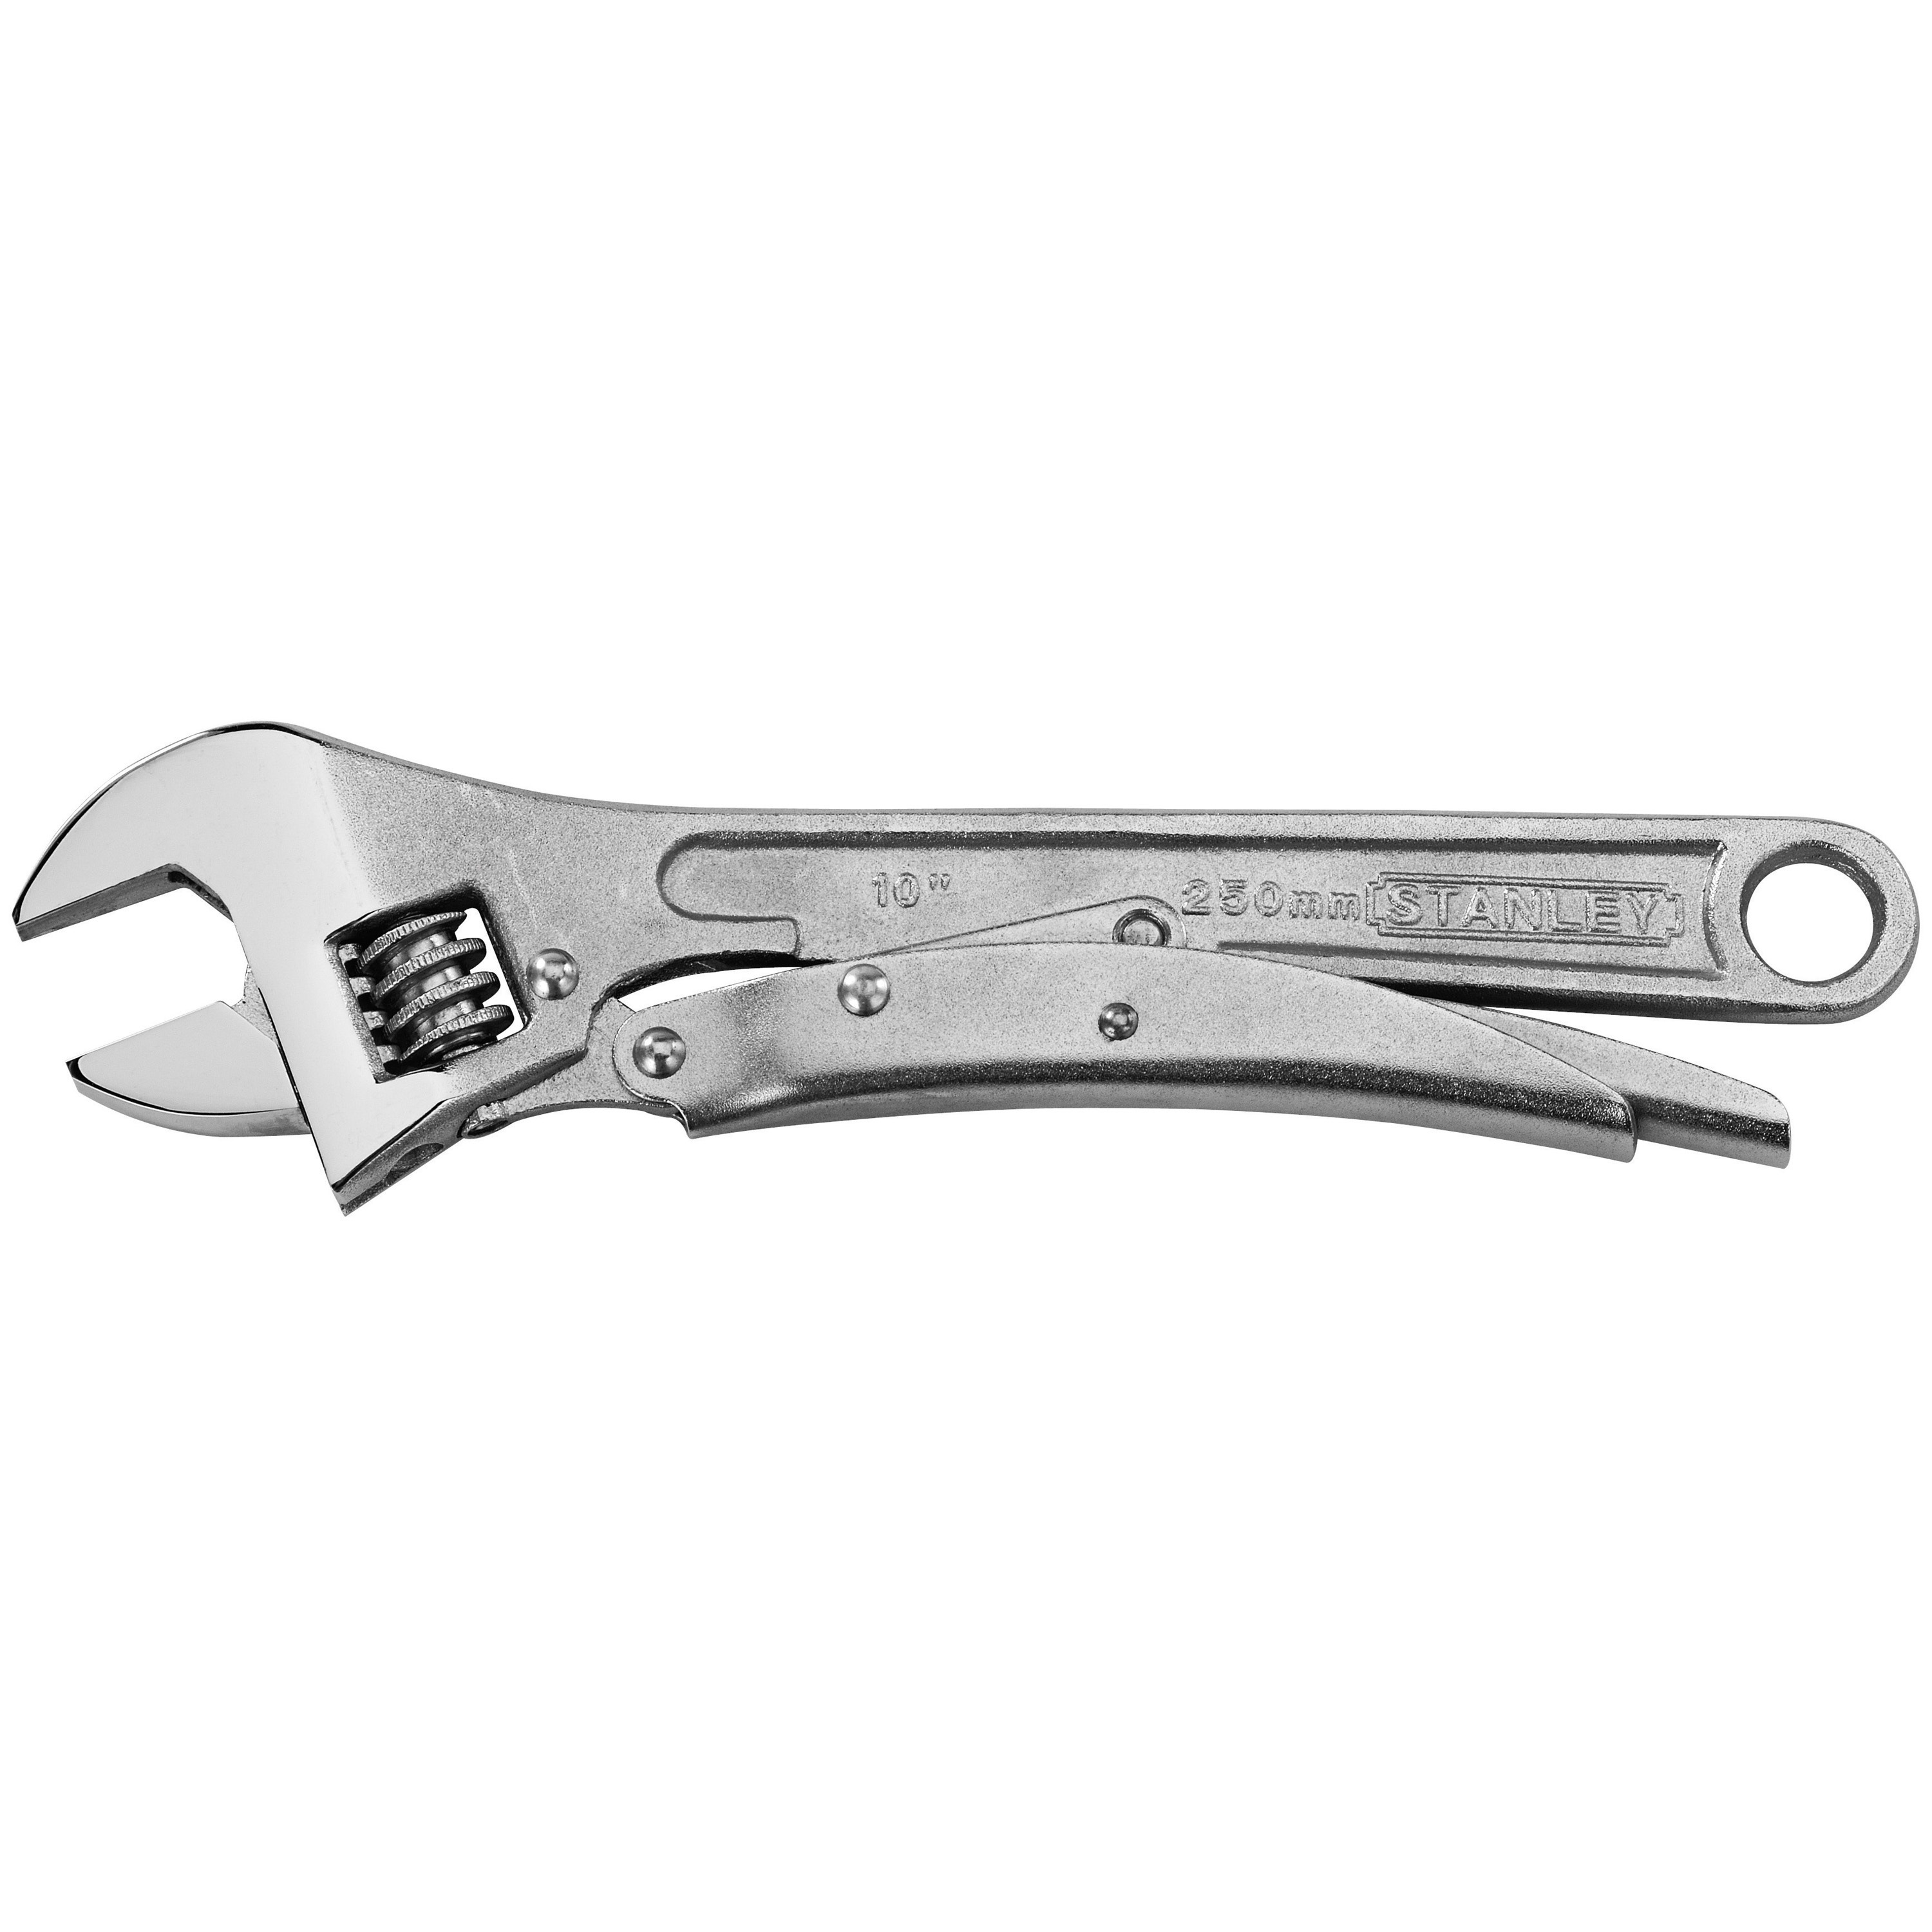 8 inch 8//10 Inch Adjustable Wrench Multifunction Non-Slip TPR Handle Spanner Self-Adjusting Spanner Power Grip Wrench Home Hand Repair Tool